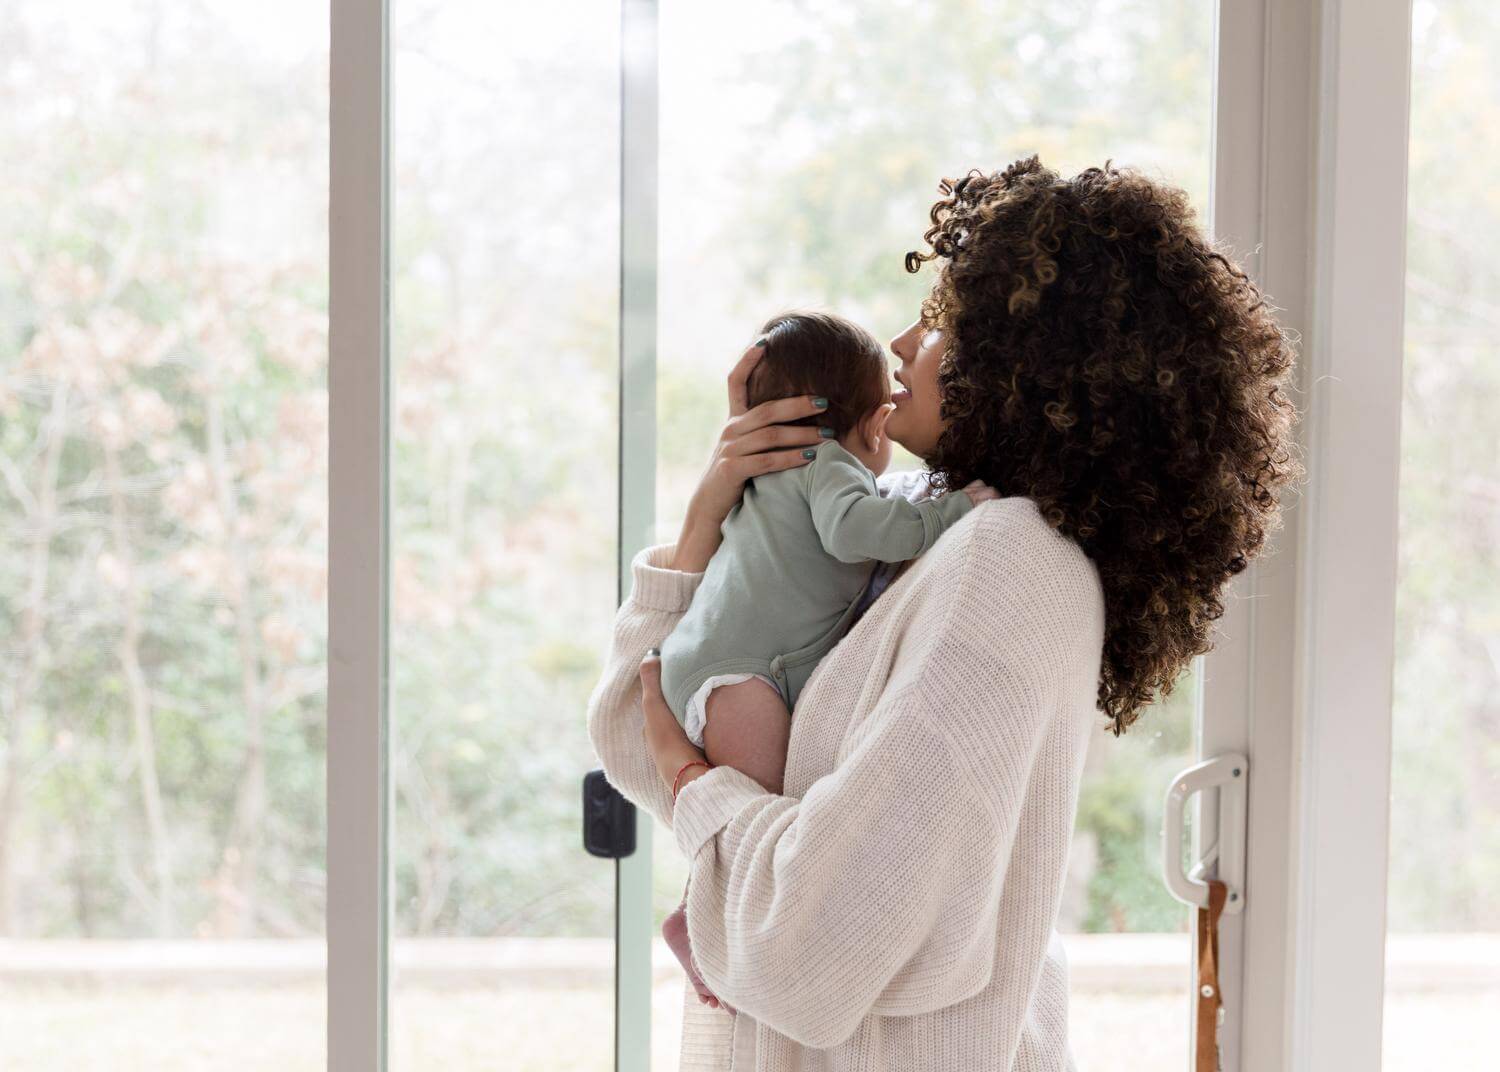 Profile photo of woman holding baby, windows in background